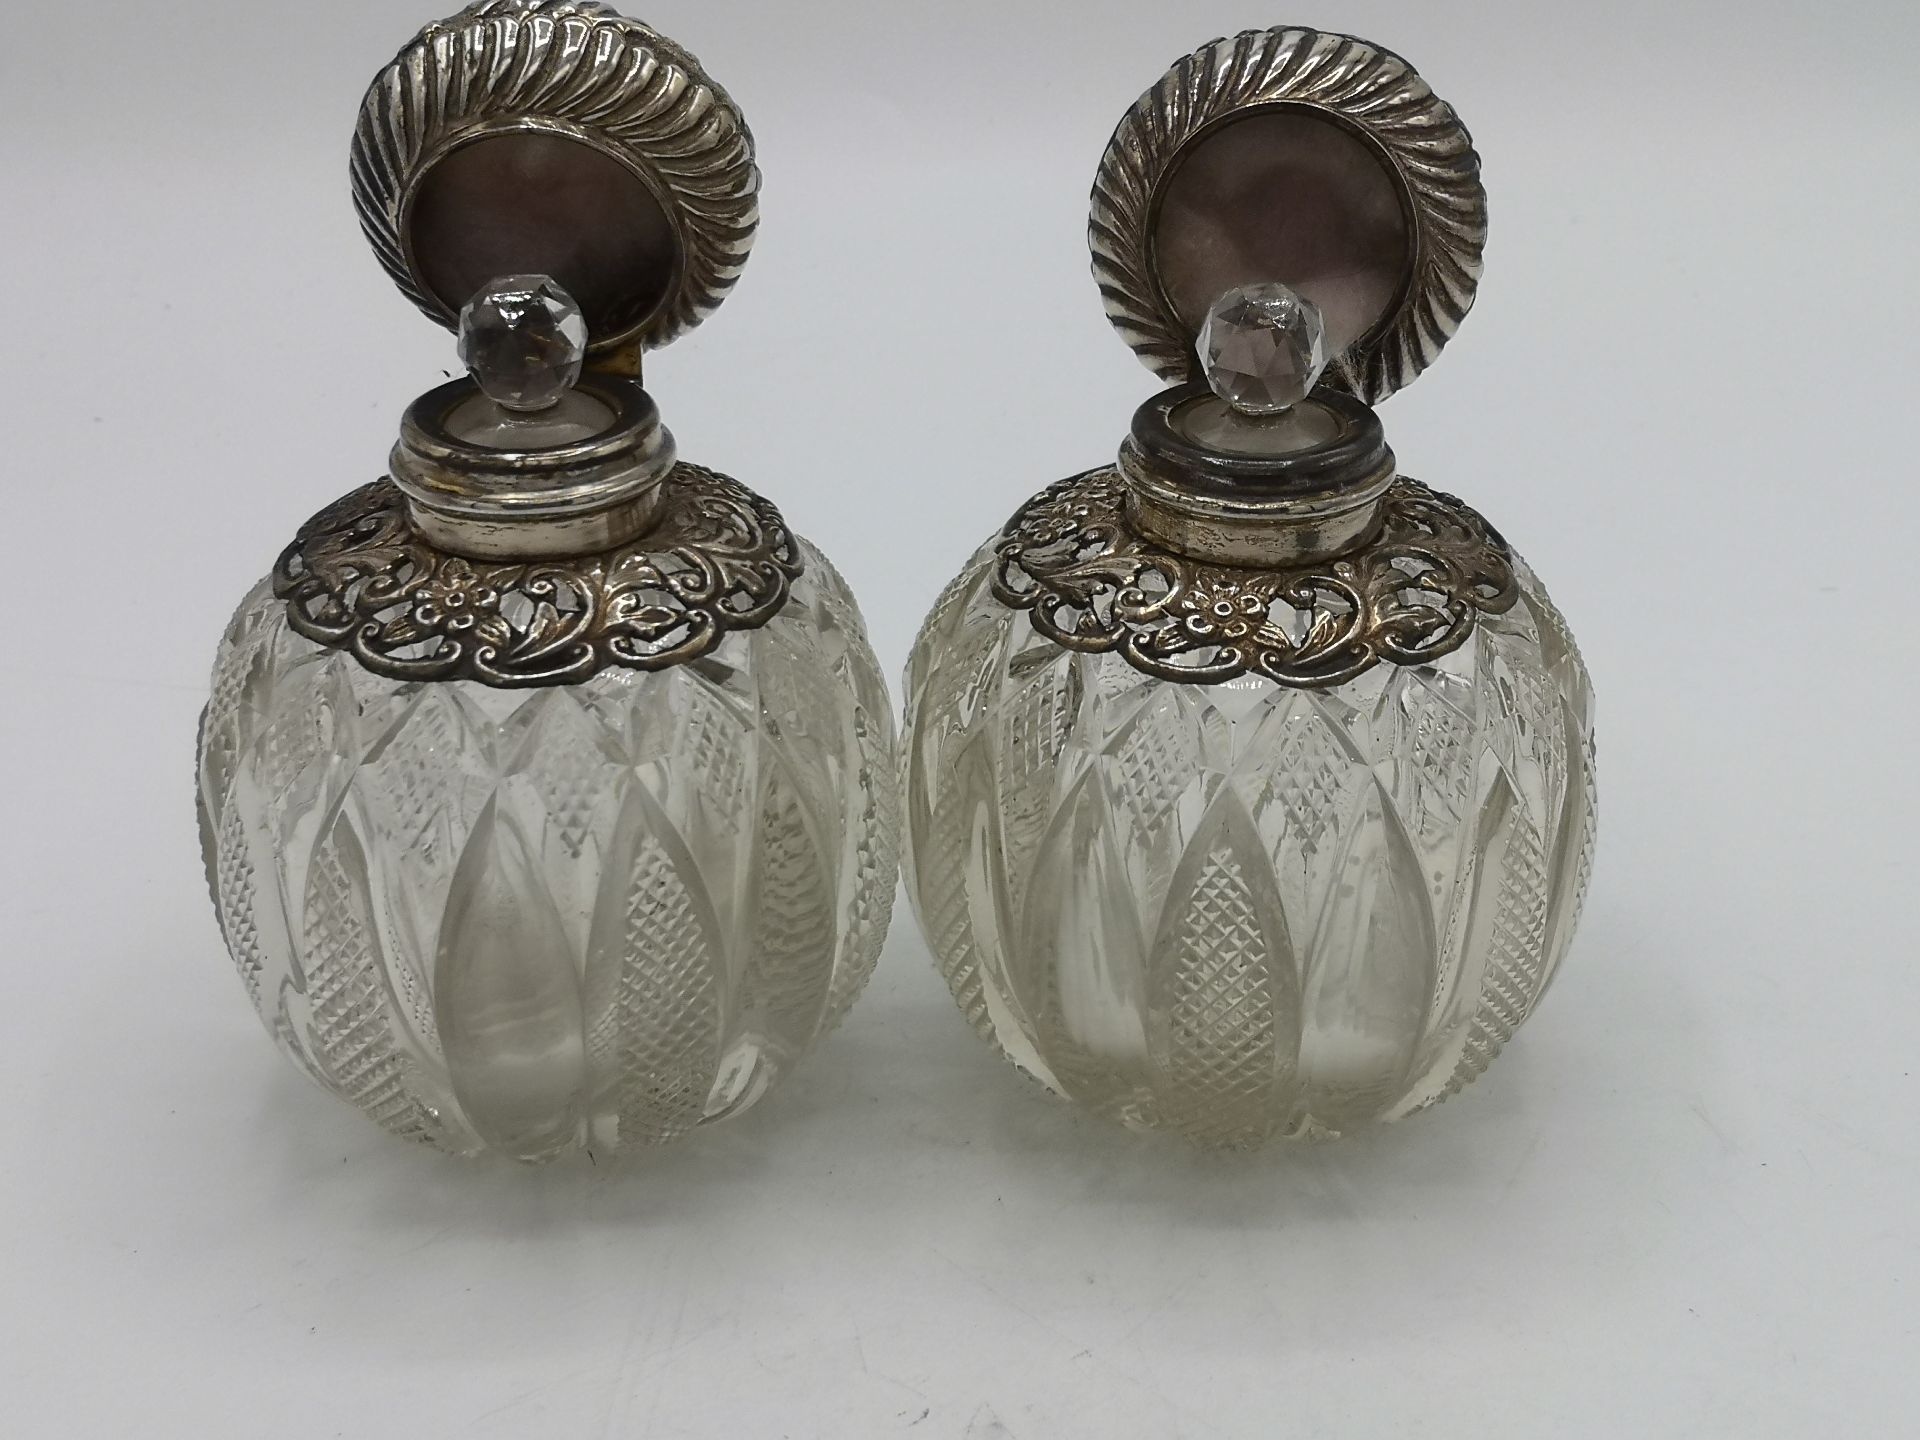 Two cut glass and silver perfume bottles - Image 2 of 5